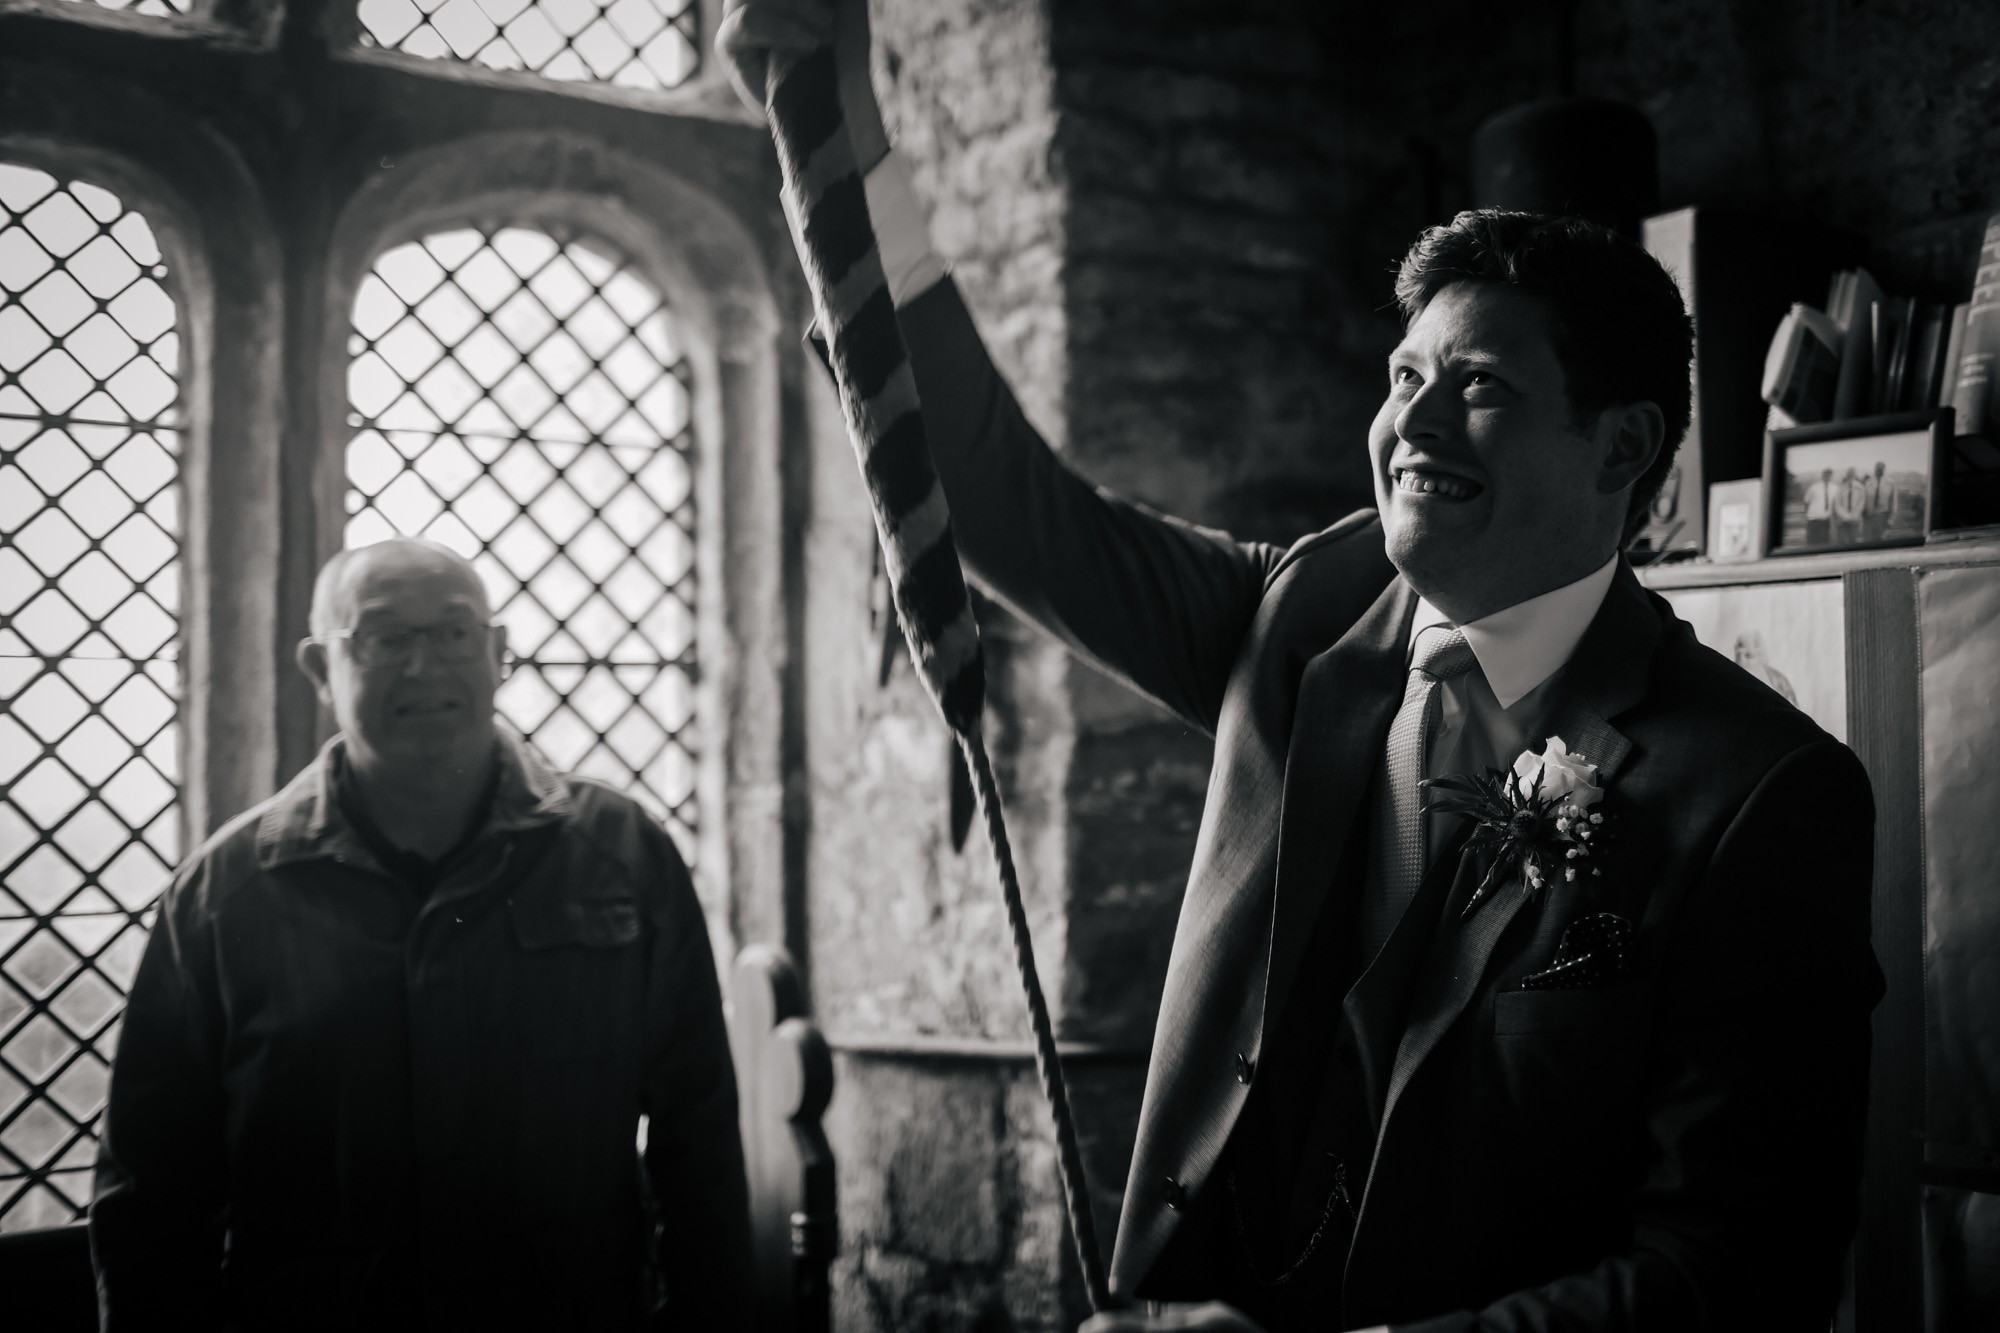 Groom ringing the church bell on his wedding day